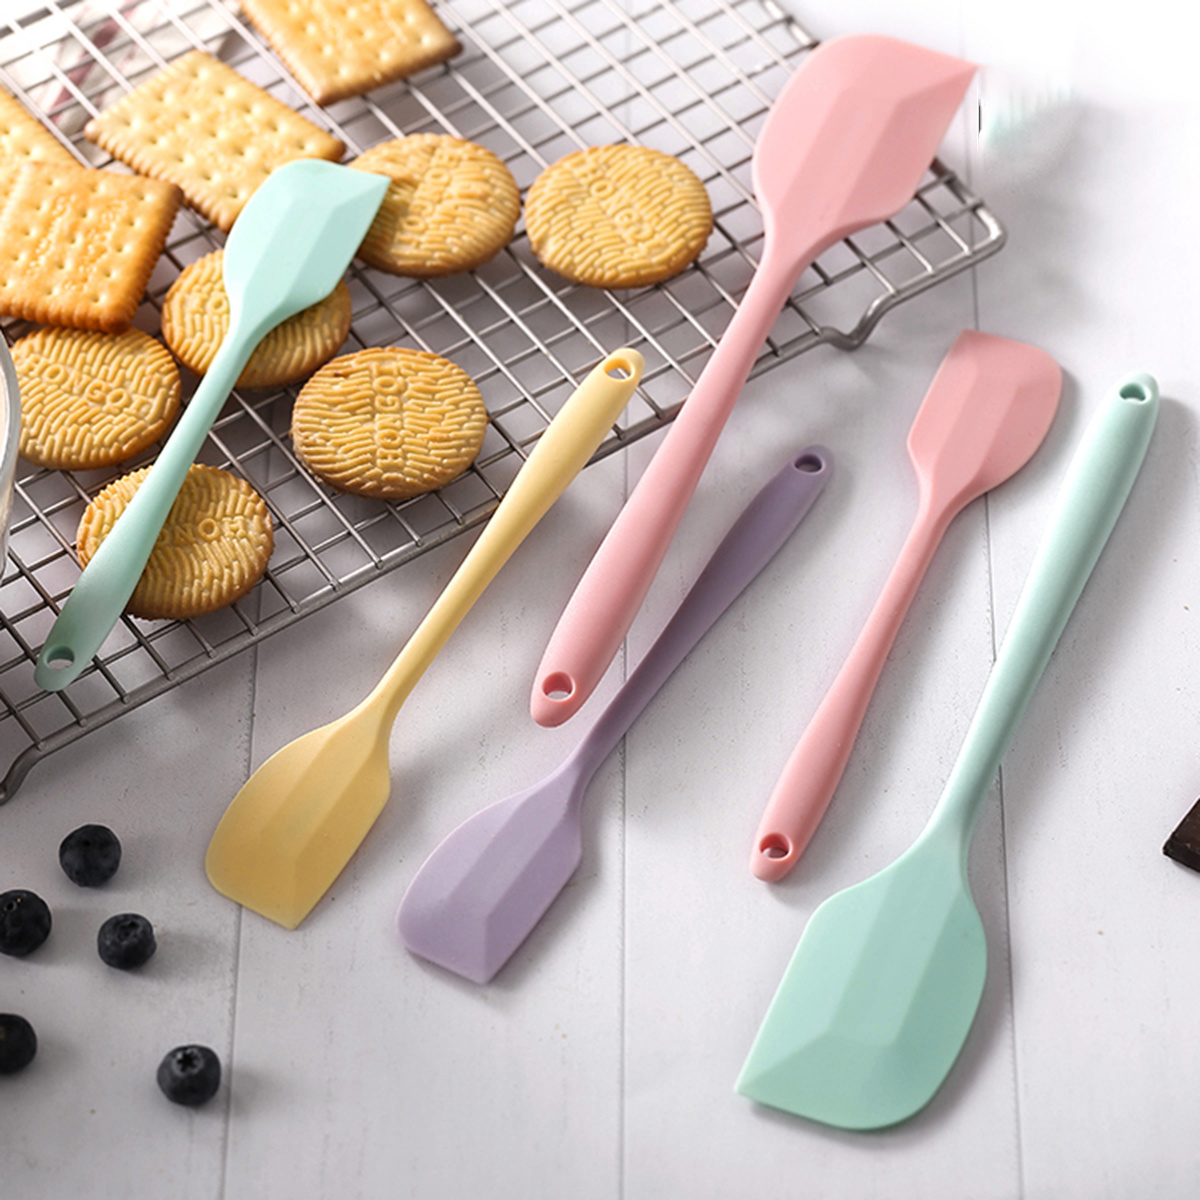 1pc, Kitchen Baking Tools, Silicone Spatula, Cream SpatulaFor Baking,  Cooking, And Mixing High Heat Resistant Non StickDishwasher Safe  Multicolor, Baking Tools, Kitchen Gadgets, KitchenAccessories